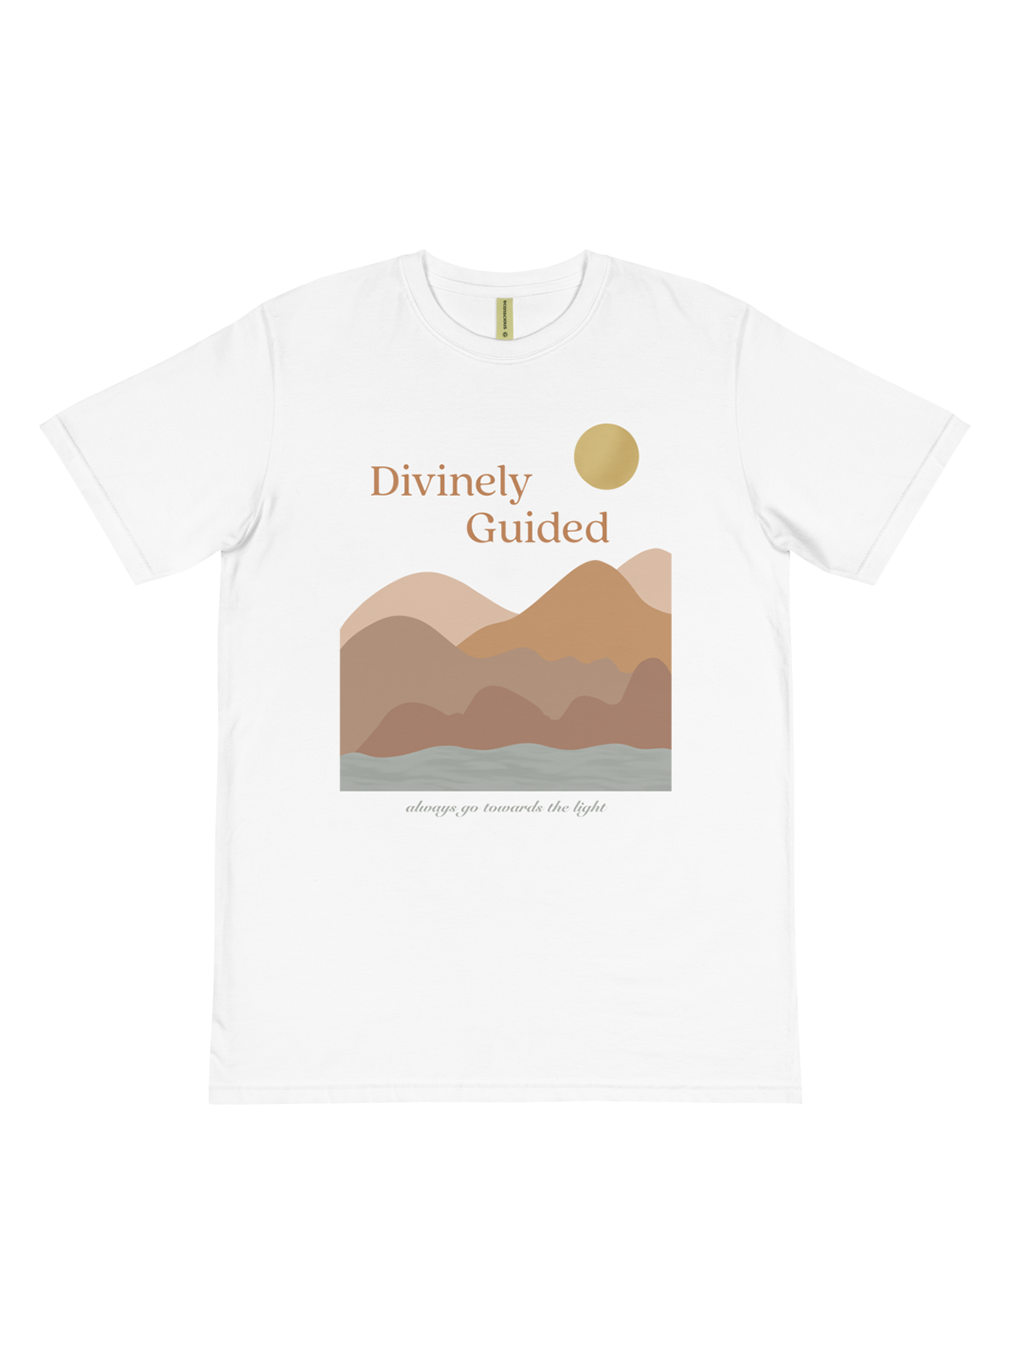 Divinely Guided T-Shirt - White